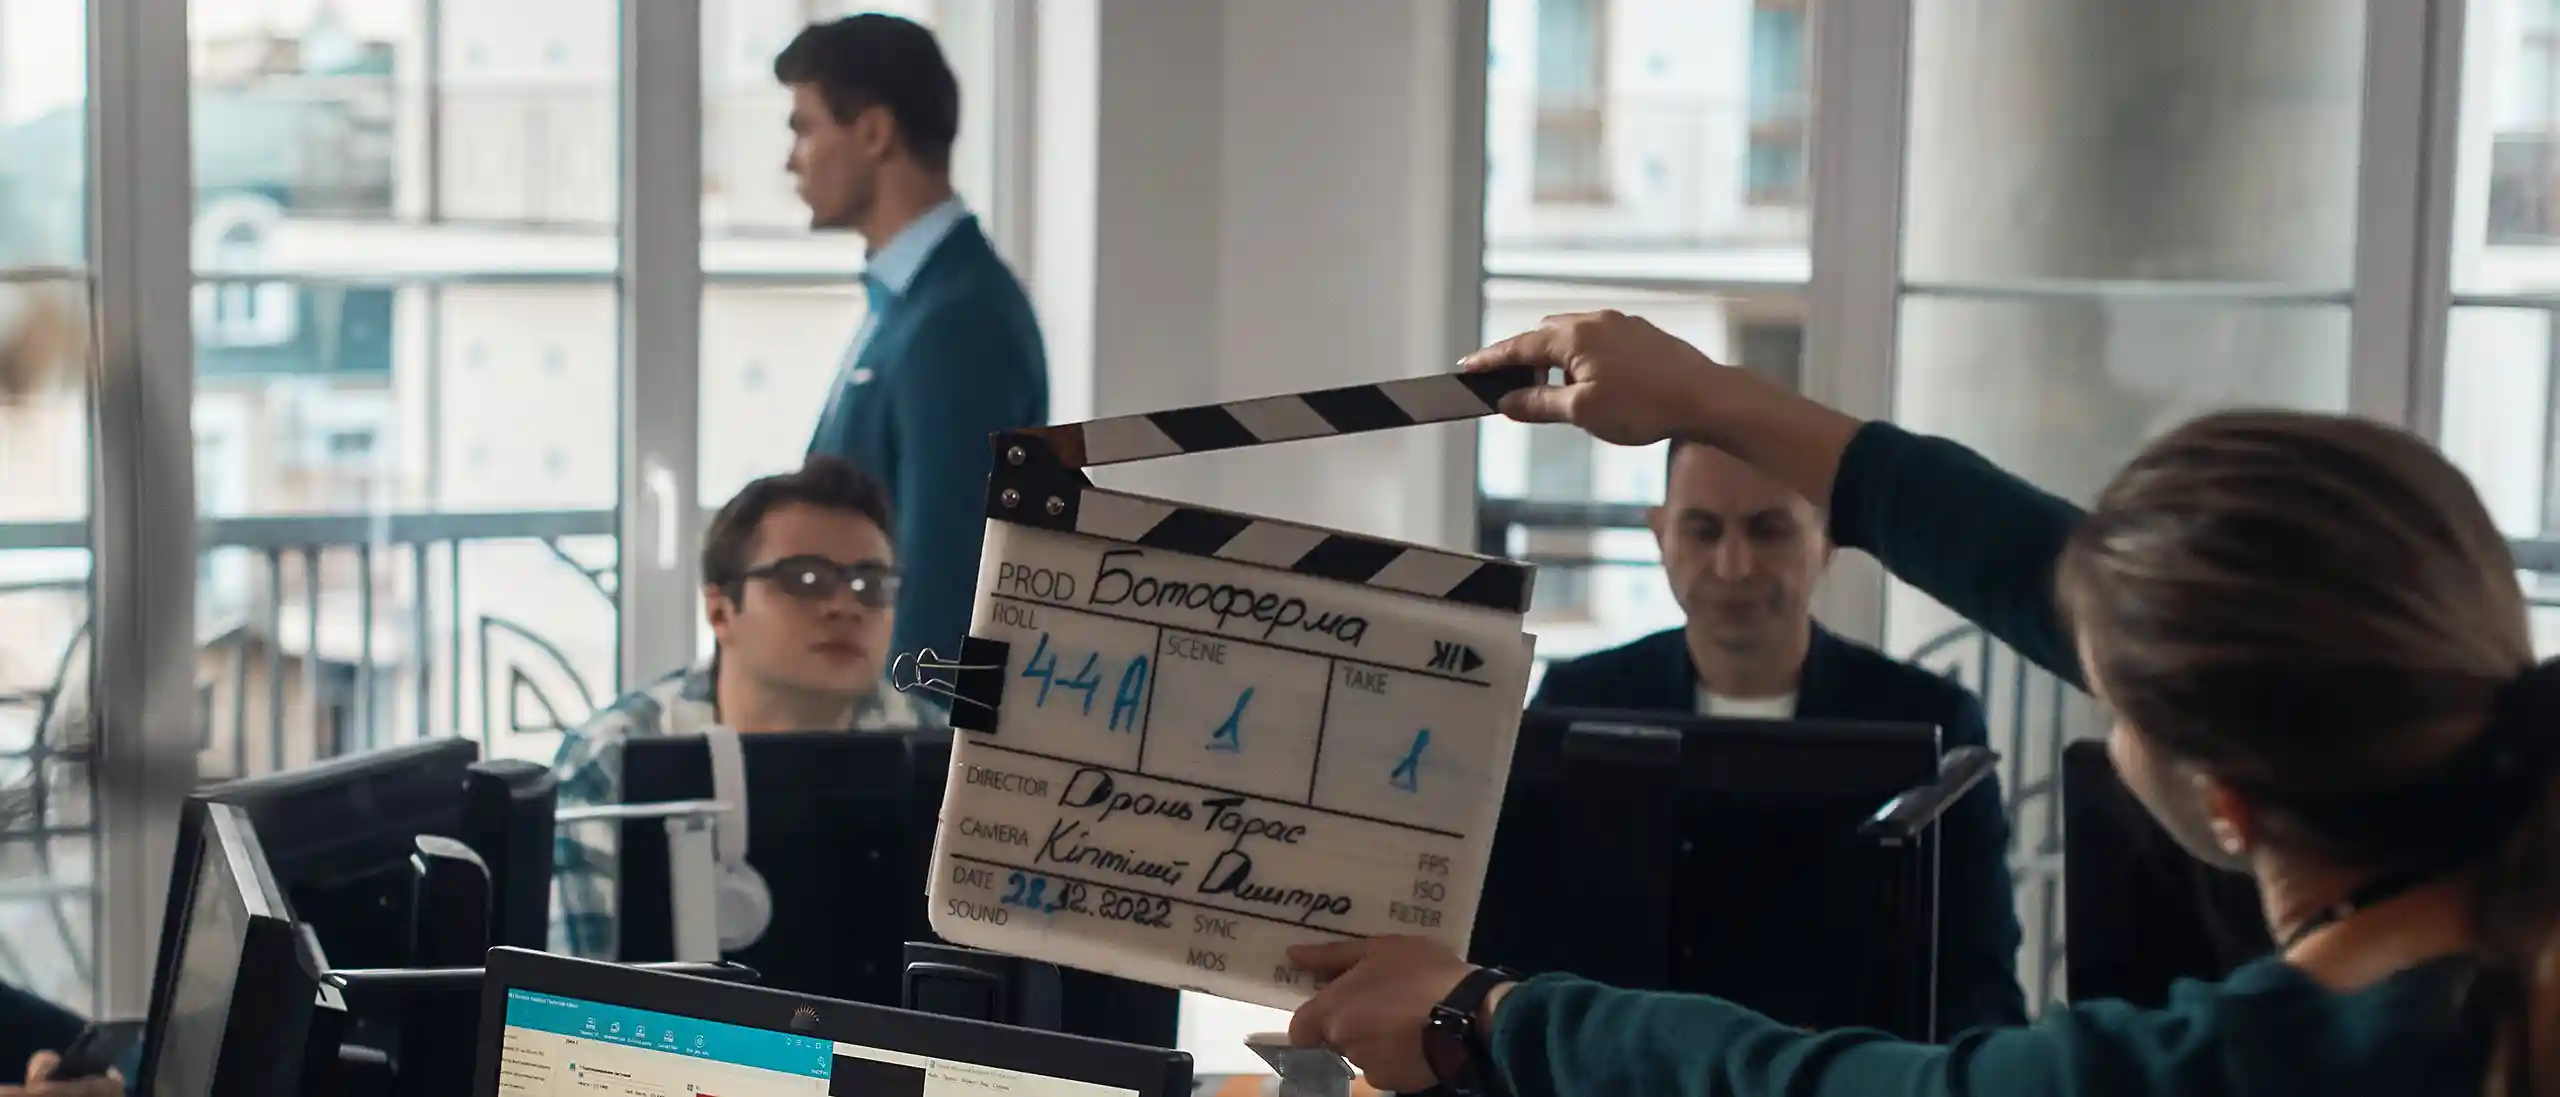 A behind-the-scenes photo from the filming of the 'Bot Farm' TV series, showcasing a clapperboard in the foreground with actors in the background.